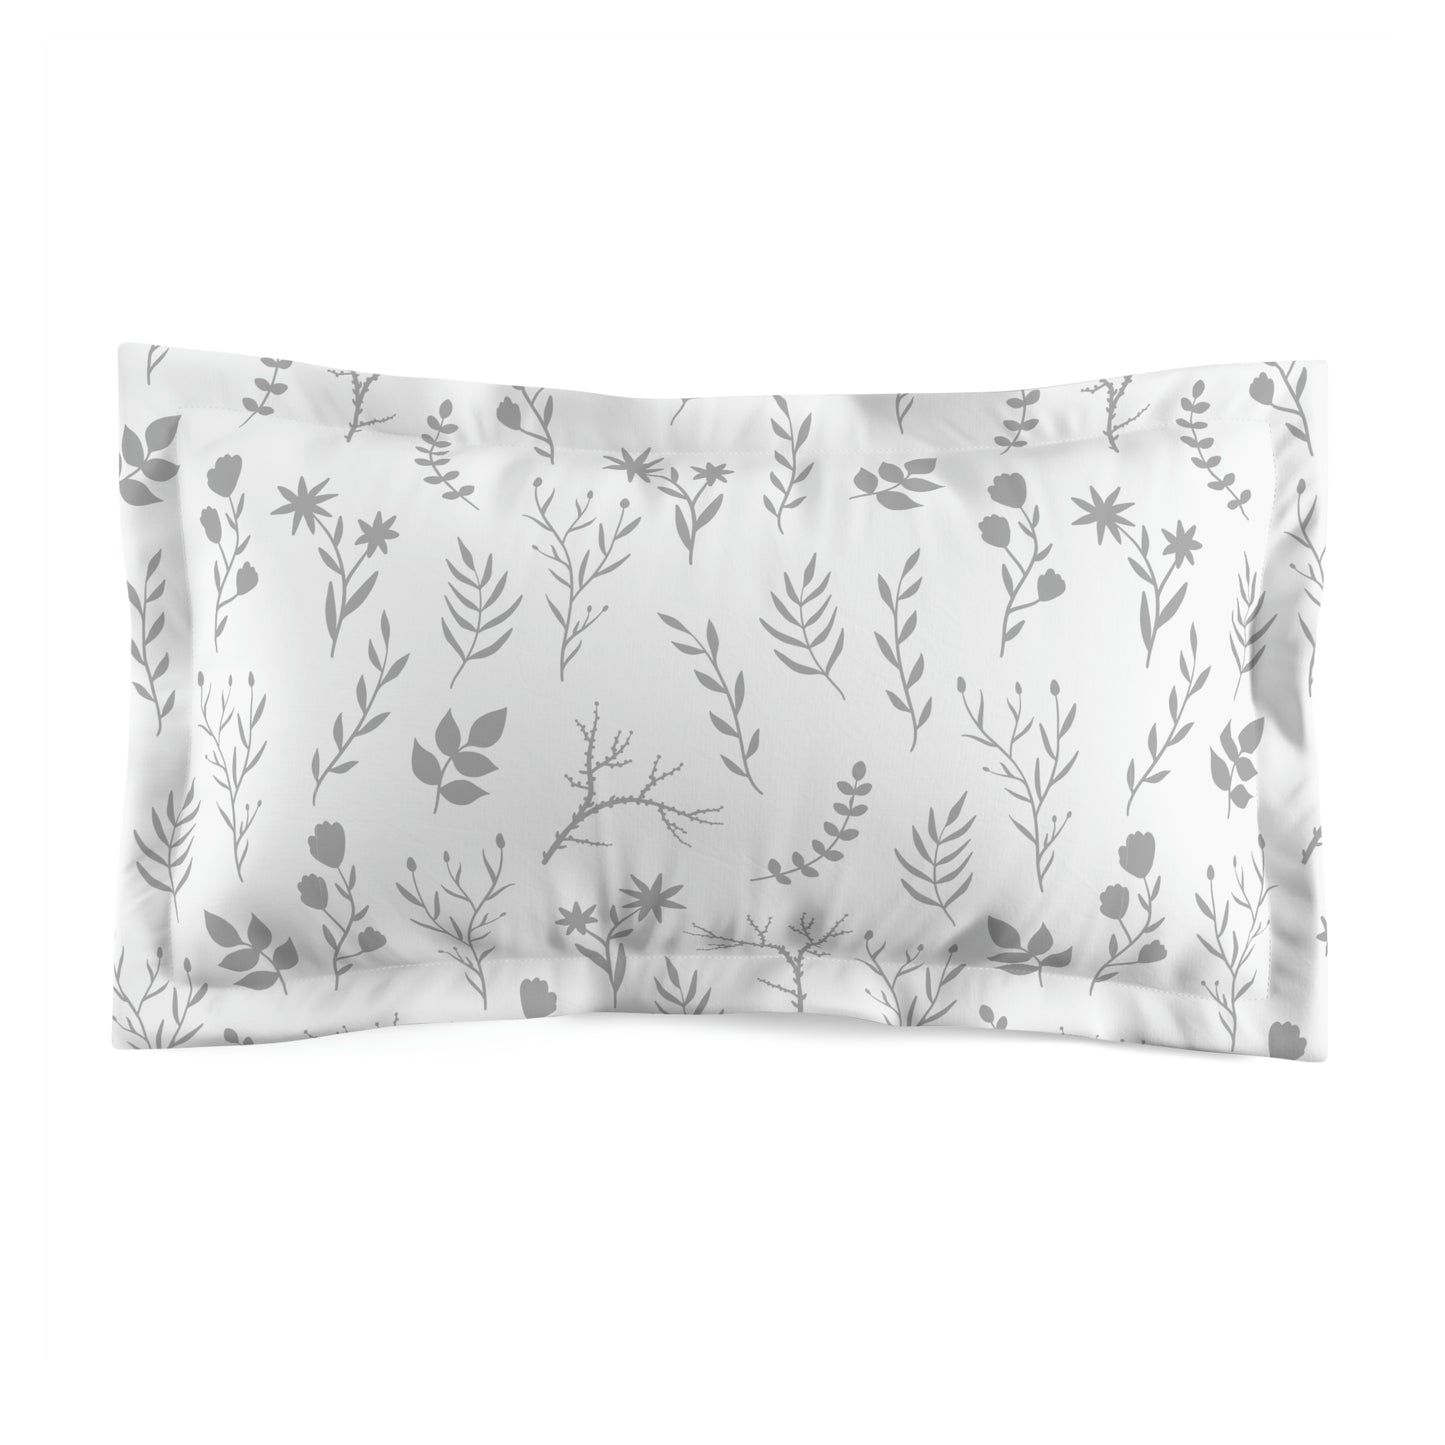 Grey & White Floral Pillow Sham – Transform Your Bedroom with Style!